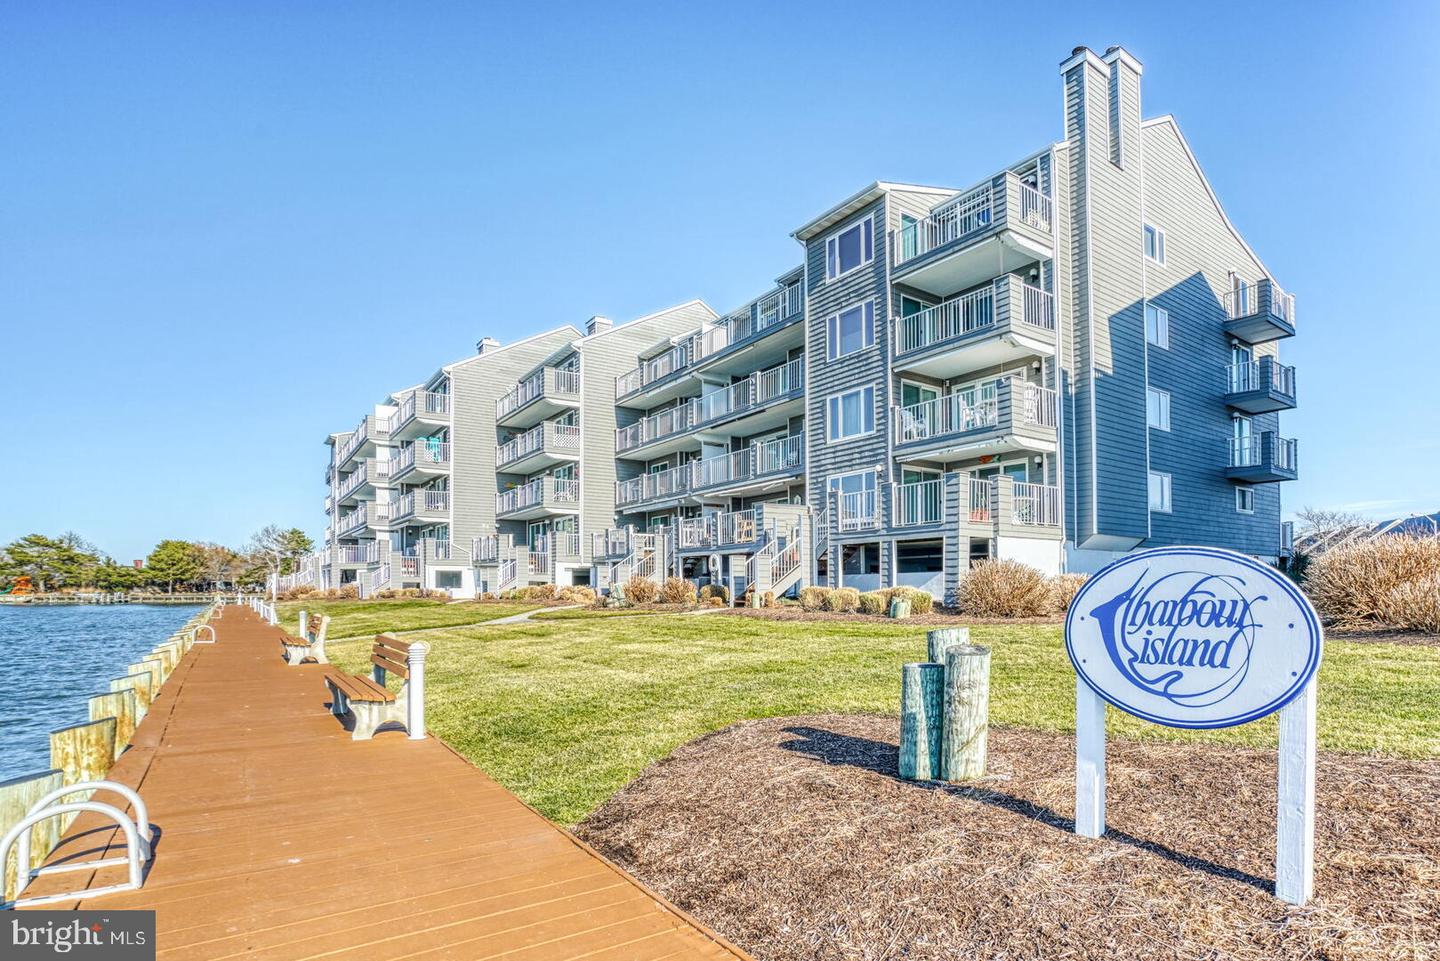 MDWO2018684-802839134838-2024-01-30-15-23-56 427 14th St #401 M | Ocean City, MD Real Estate For Sale | MLS# Mdwo2018684  - 1st Choice Properties